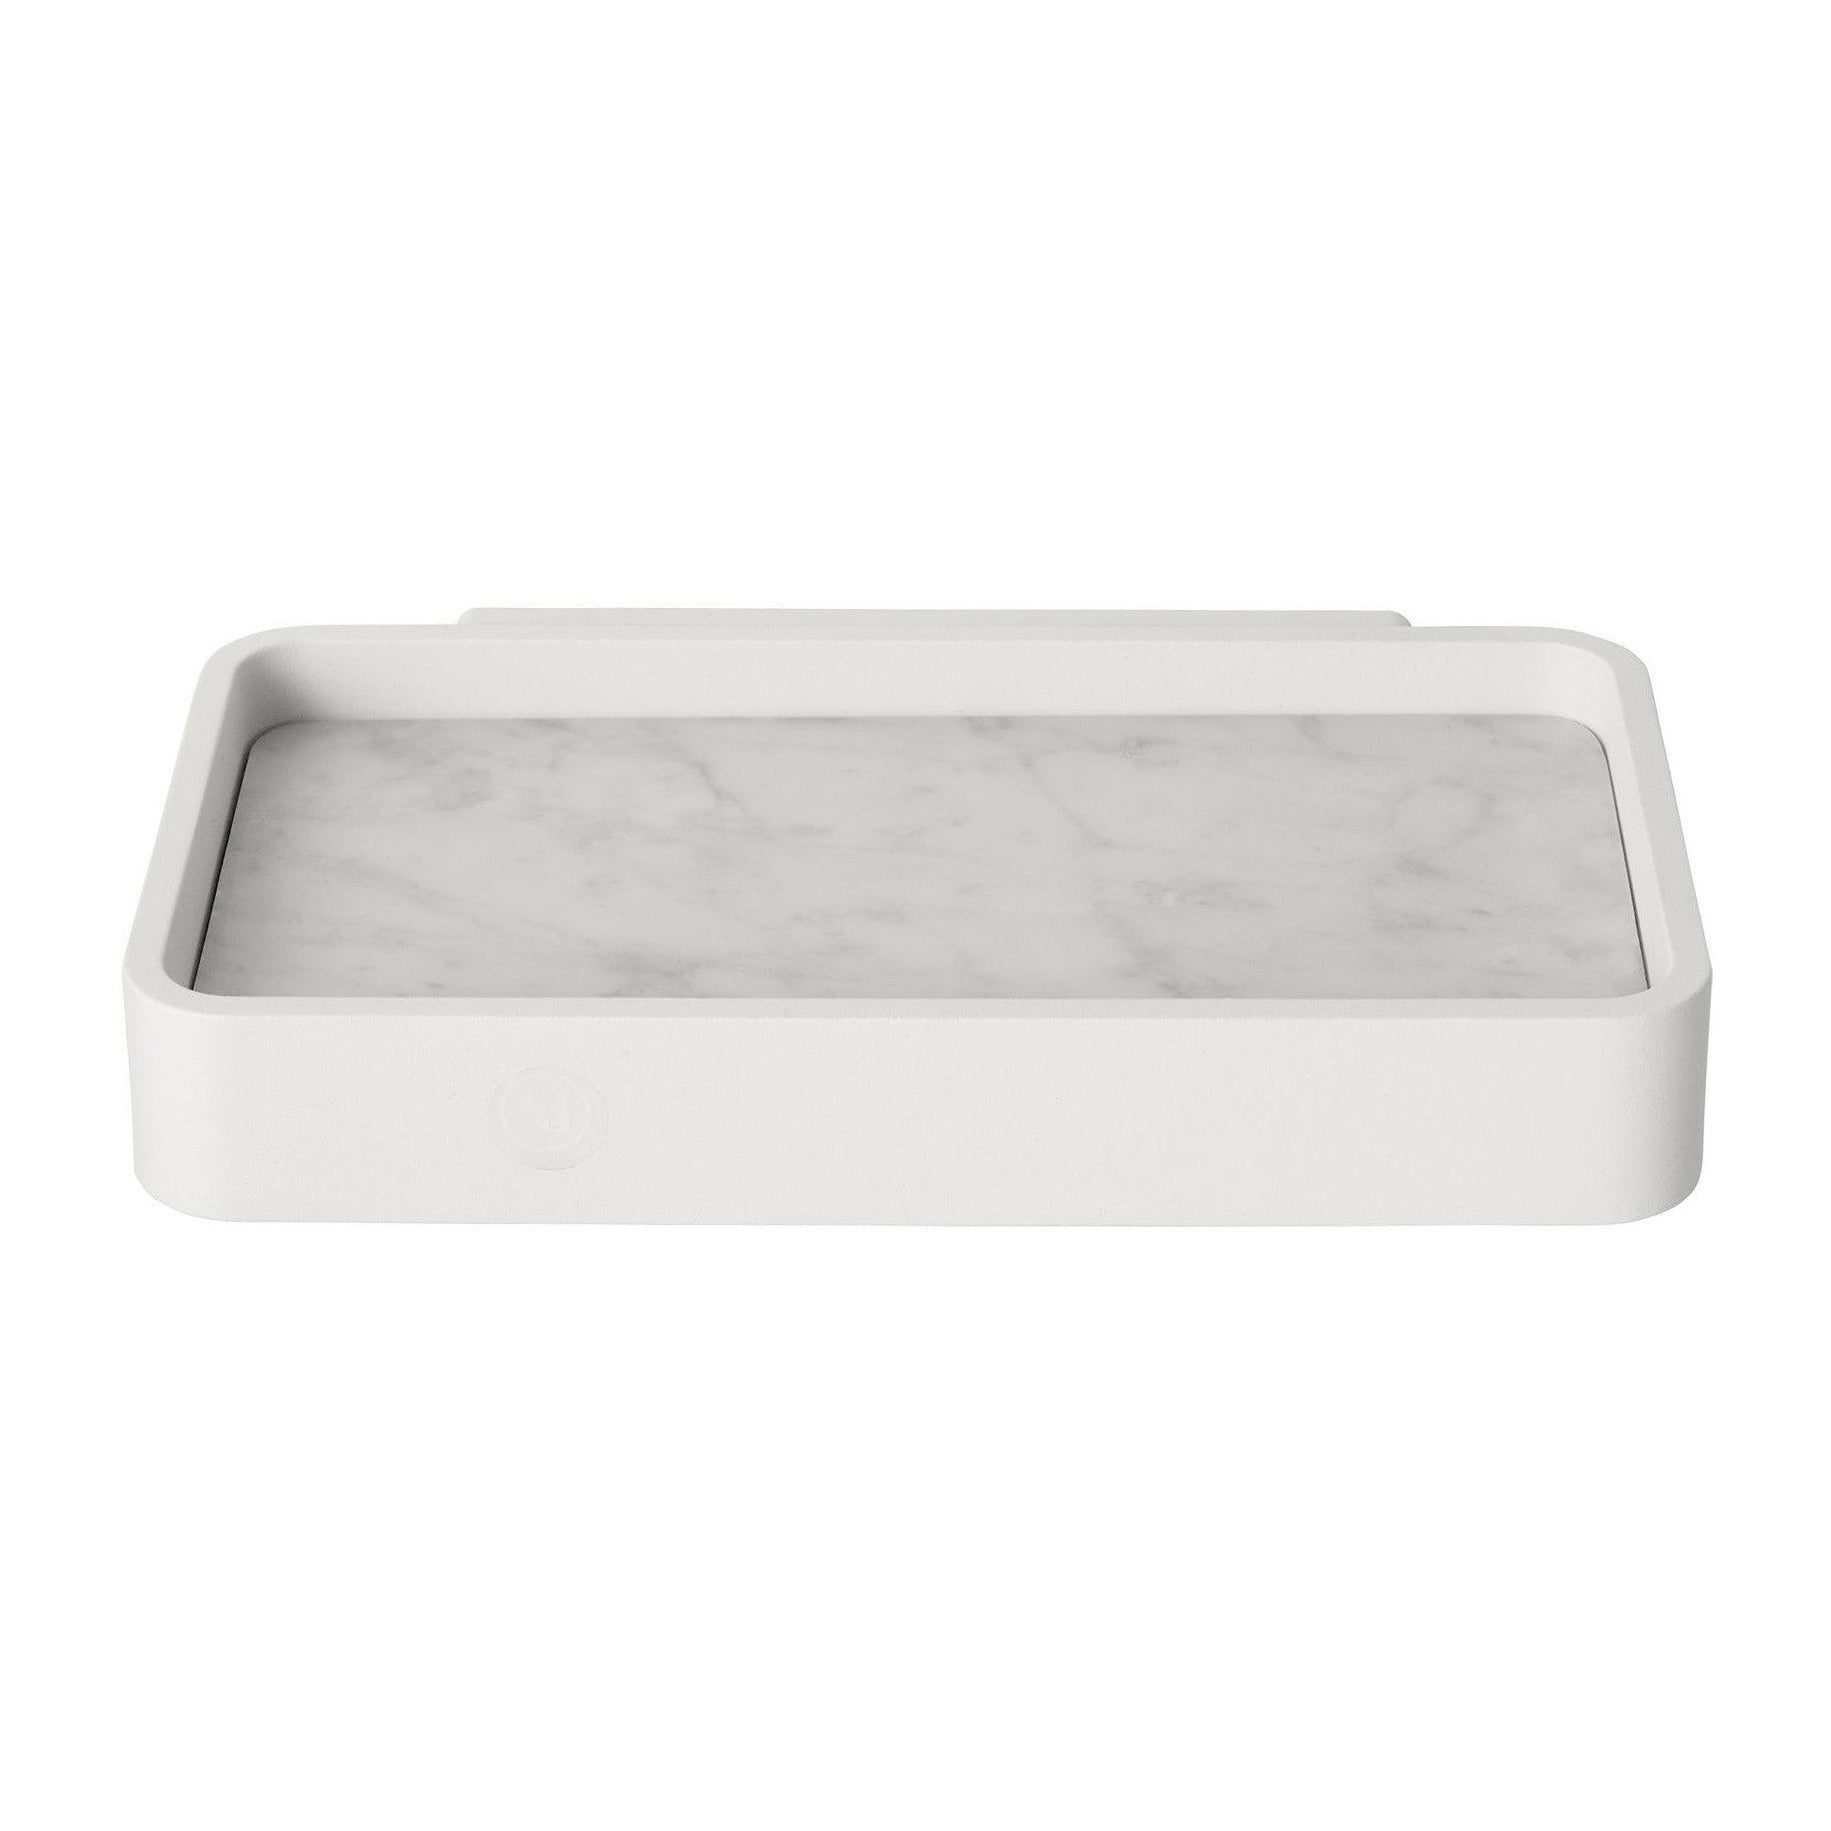 Audo NORM Wall Shower Tray